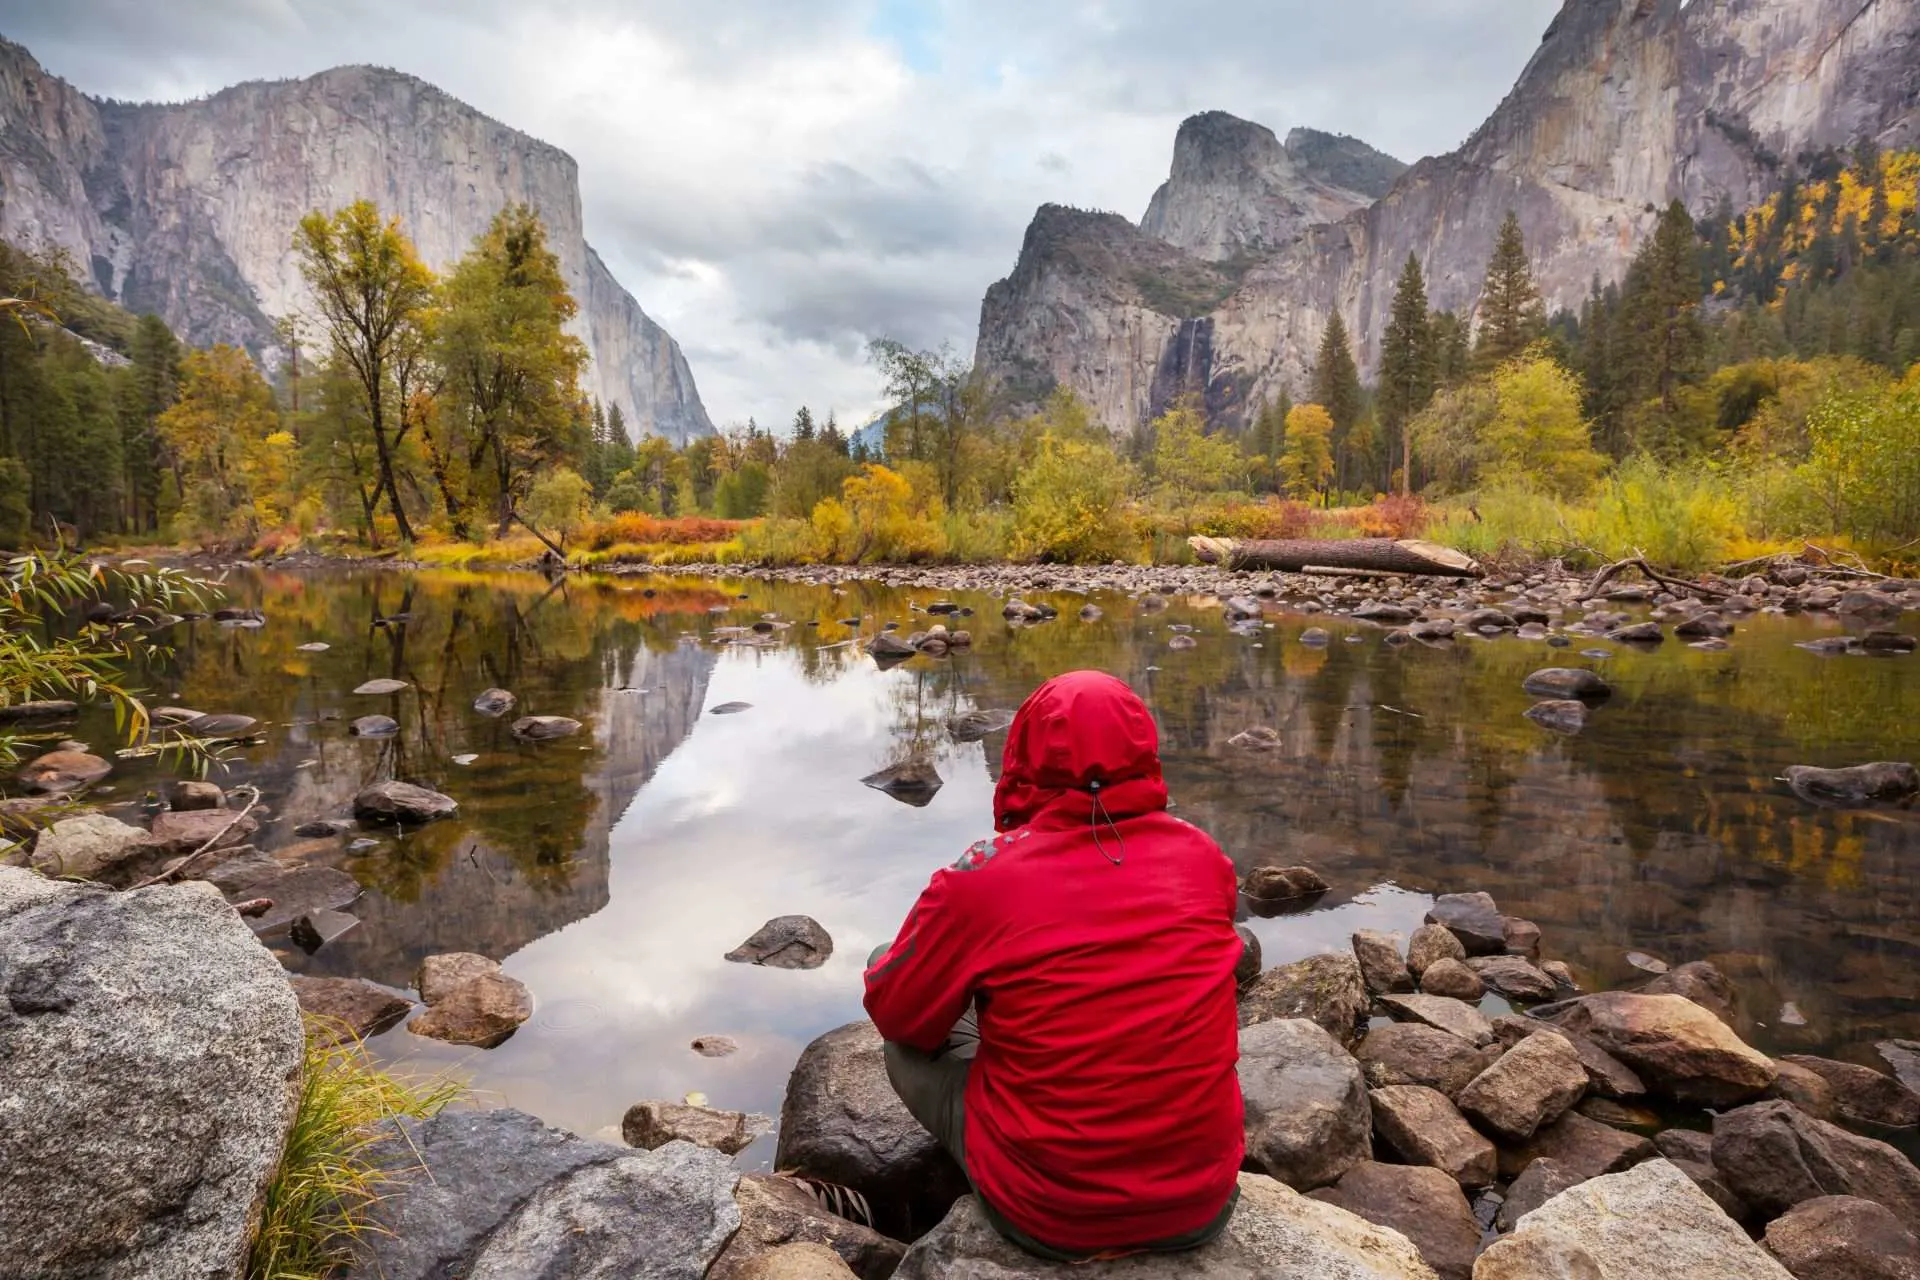 Man looking at lake and mountain view in the fall in Yosemite National Park, California, USA